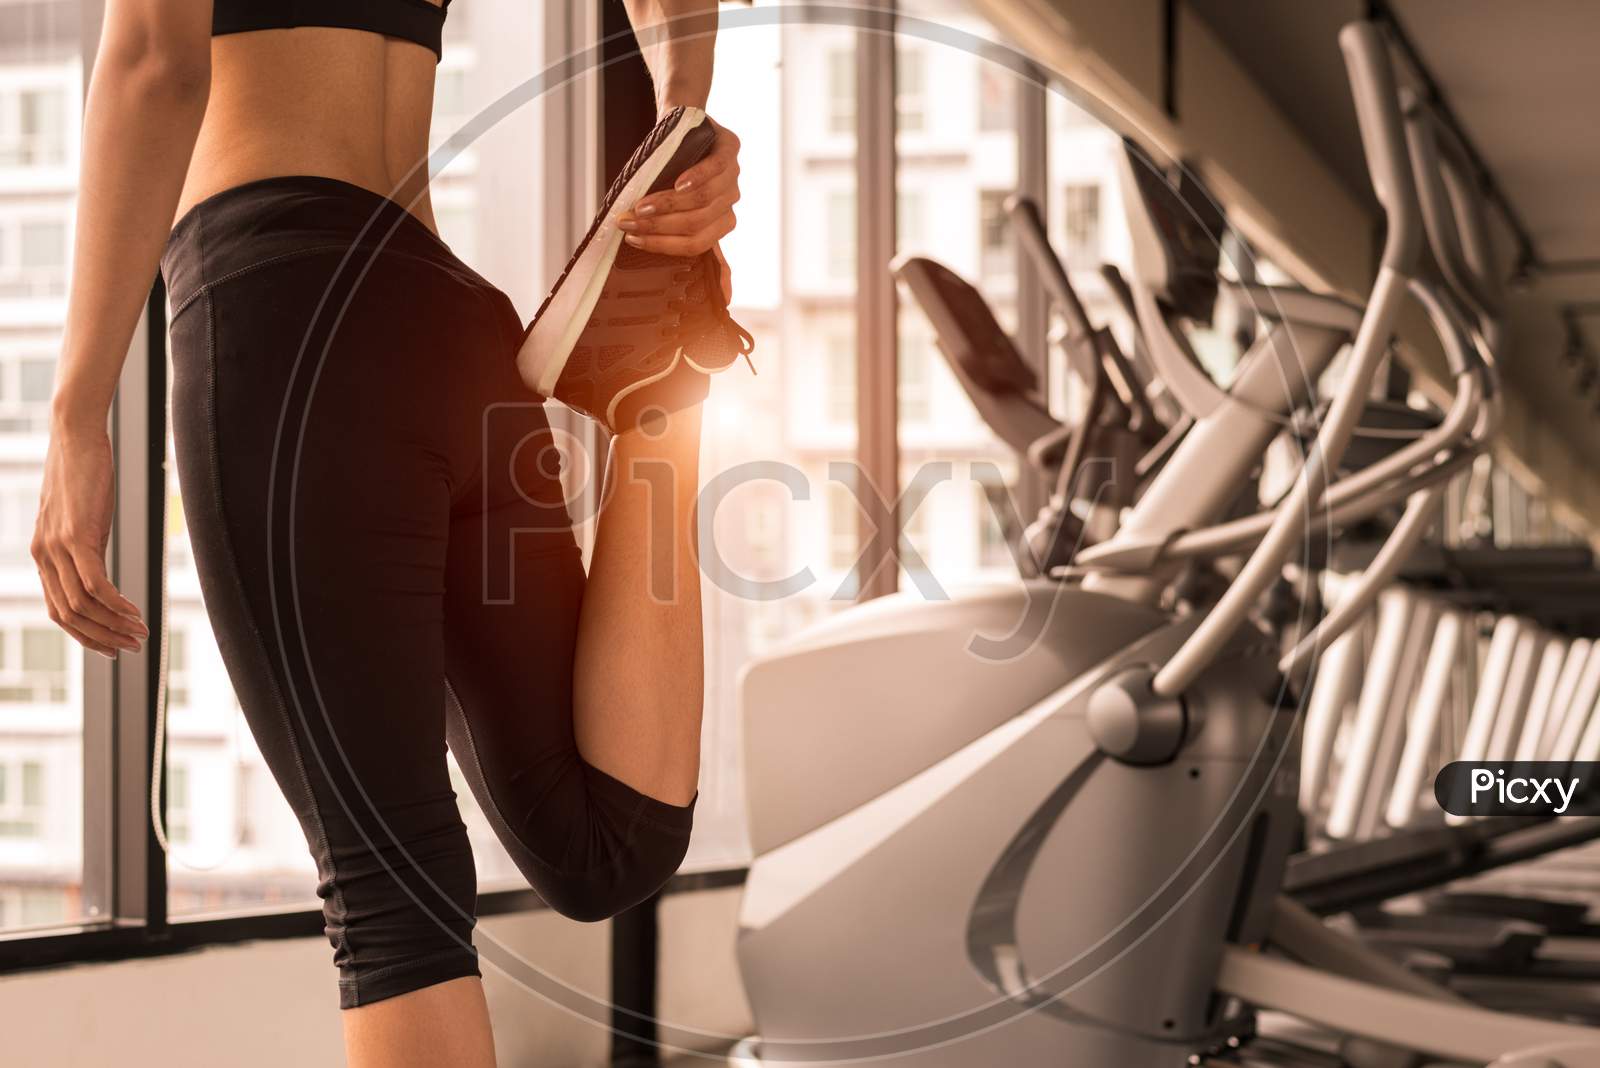 Close Up Beauty Woman Stretching Legs In Workout Fitness Gym Center With Sport Equipment And Treadmill Background. Sporty Girl Warming Up Before Exercise Training. Lifestyle And Healthy People Concept